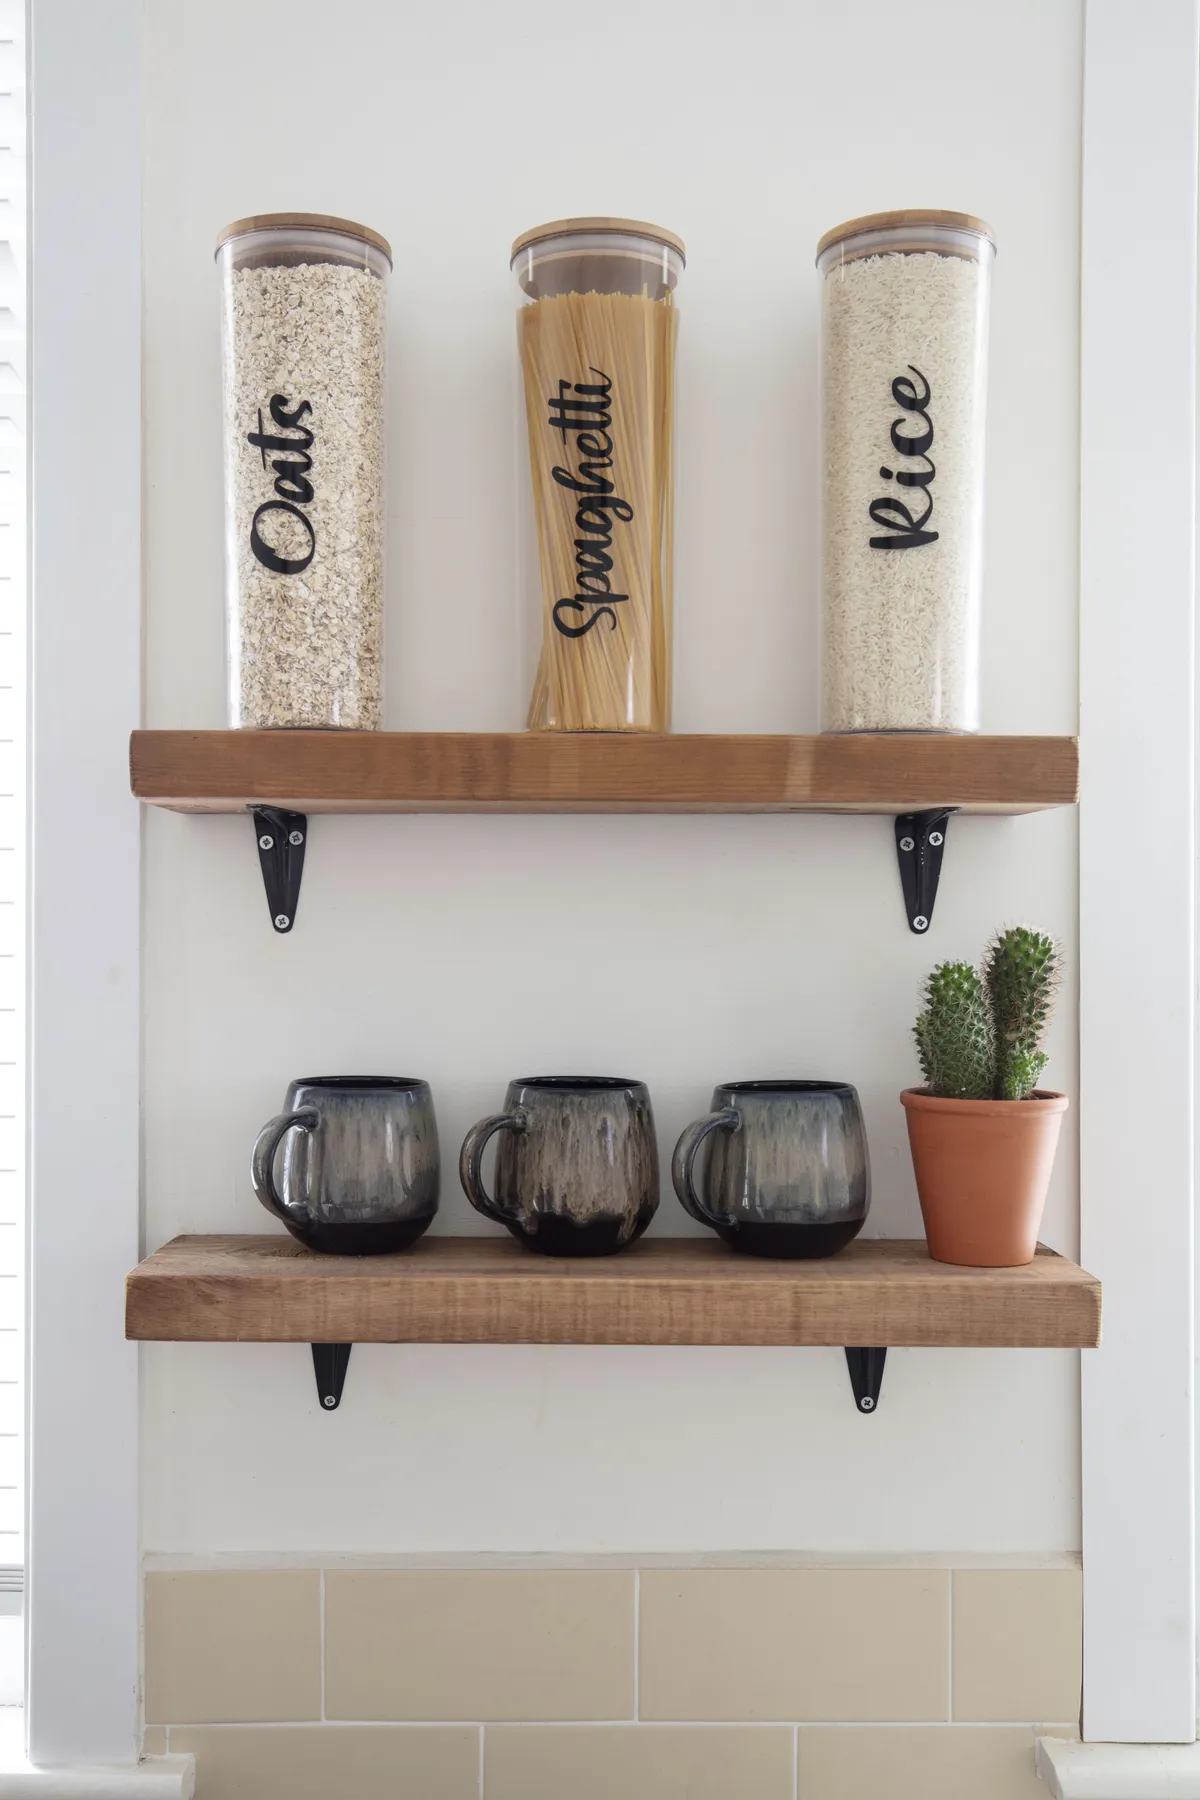 Although they’d like a new kitchen, Diandra has made the existing one their own with DIY touches. She fitted the shelves herself and decorated the jars with vinyl letters from Kady’s Creations